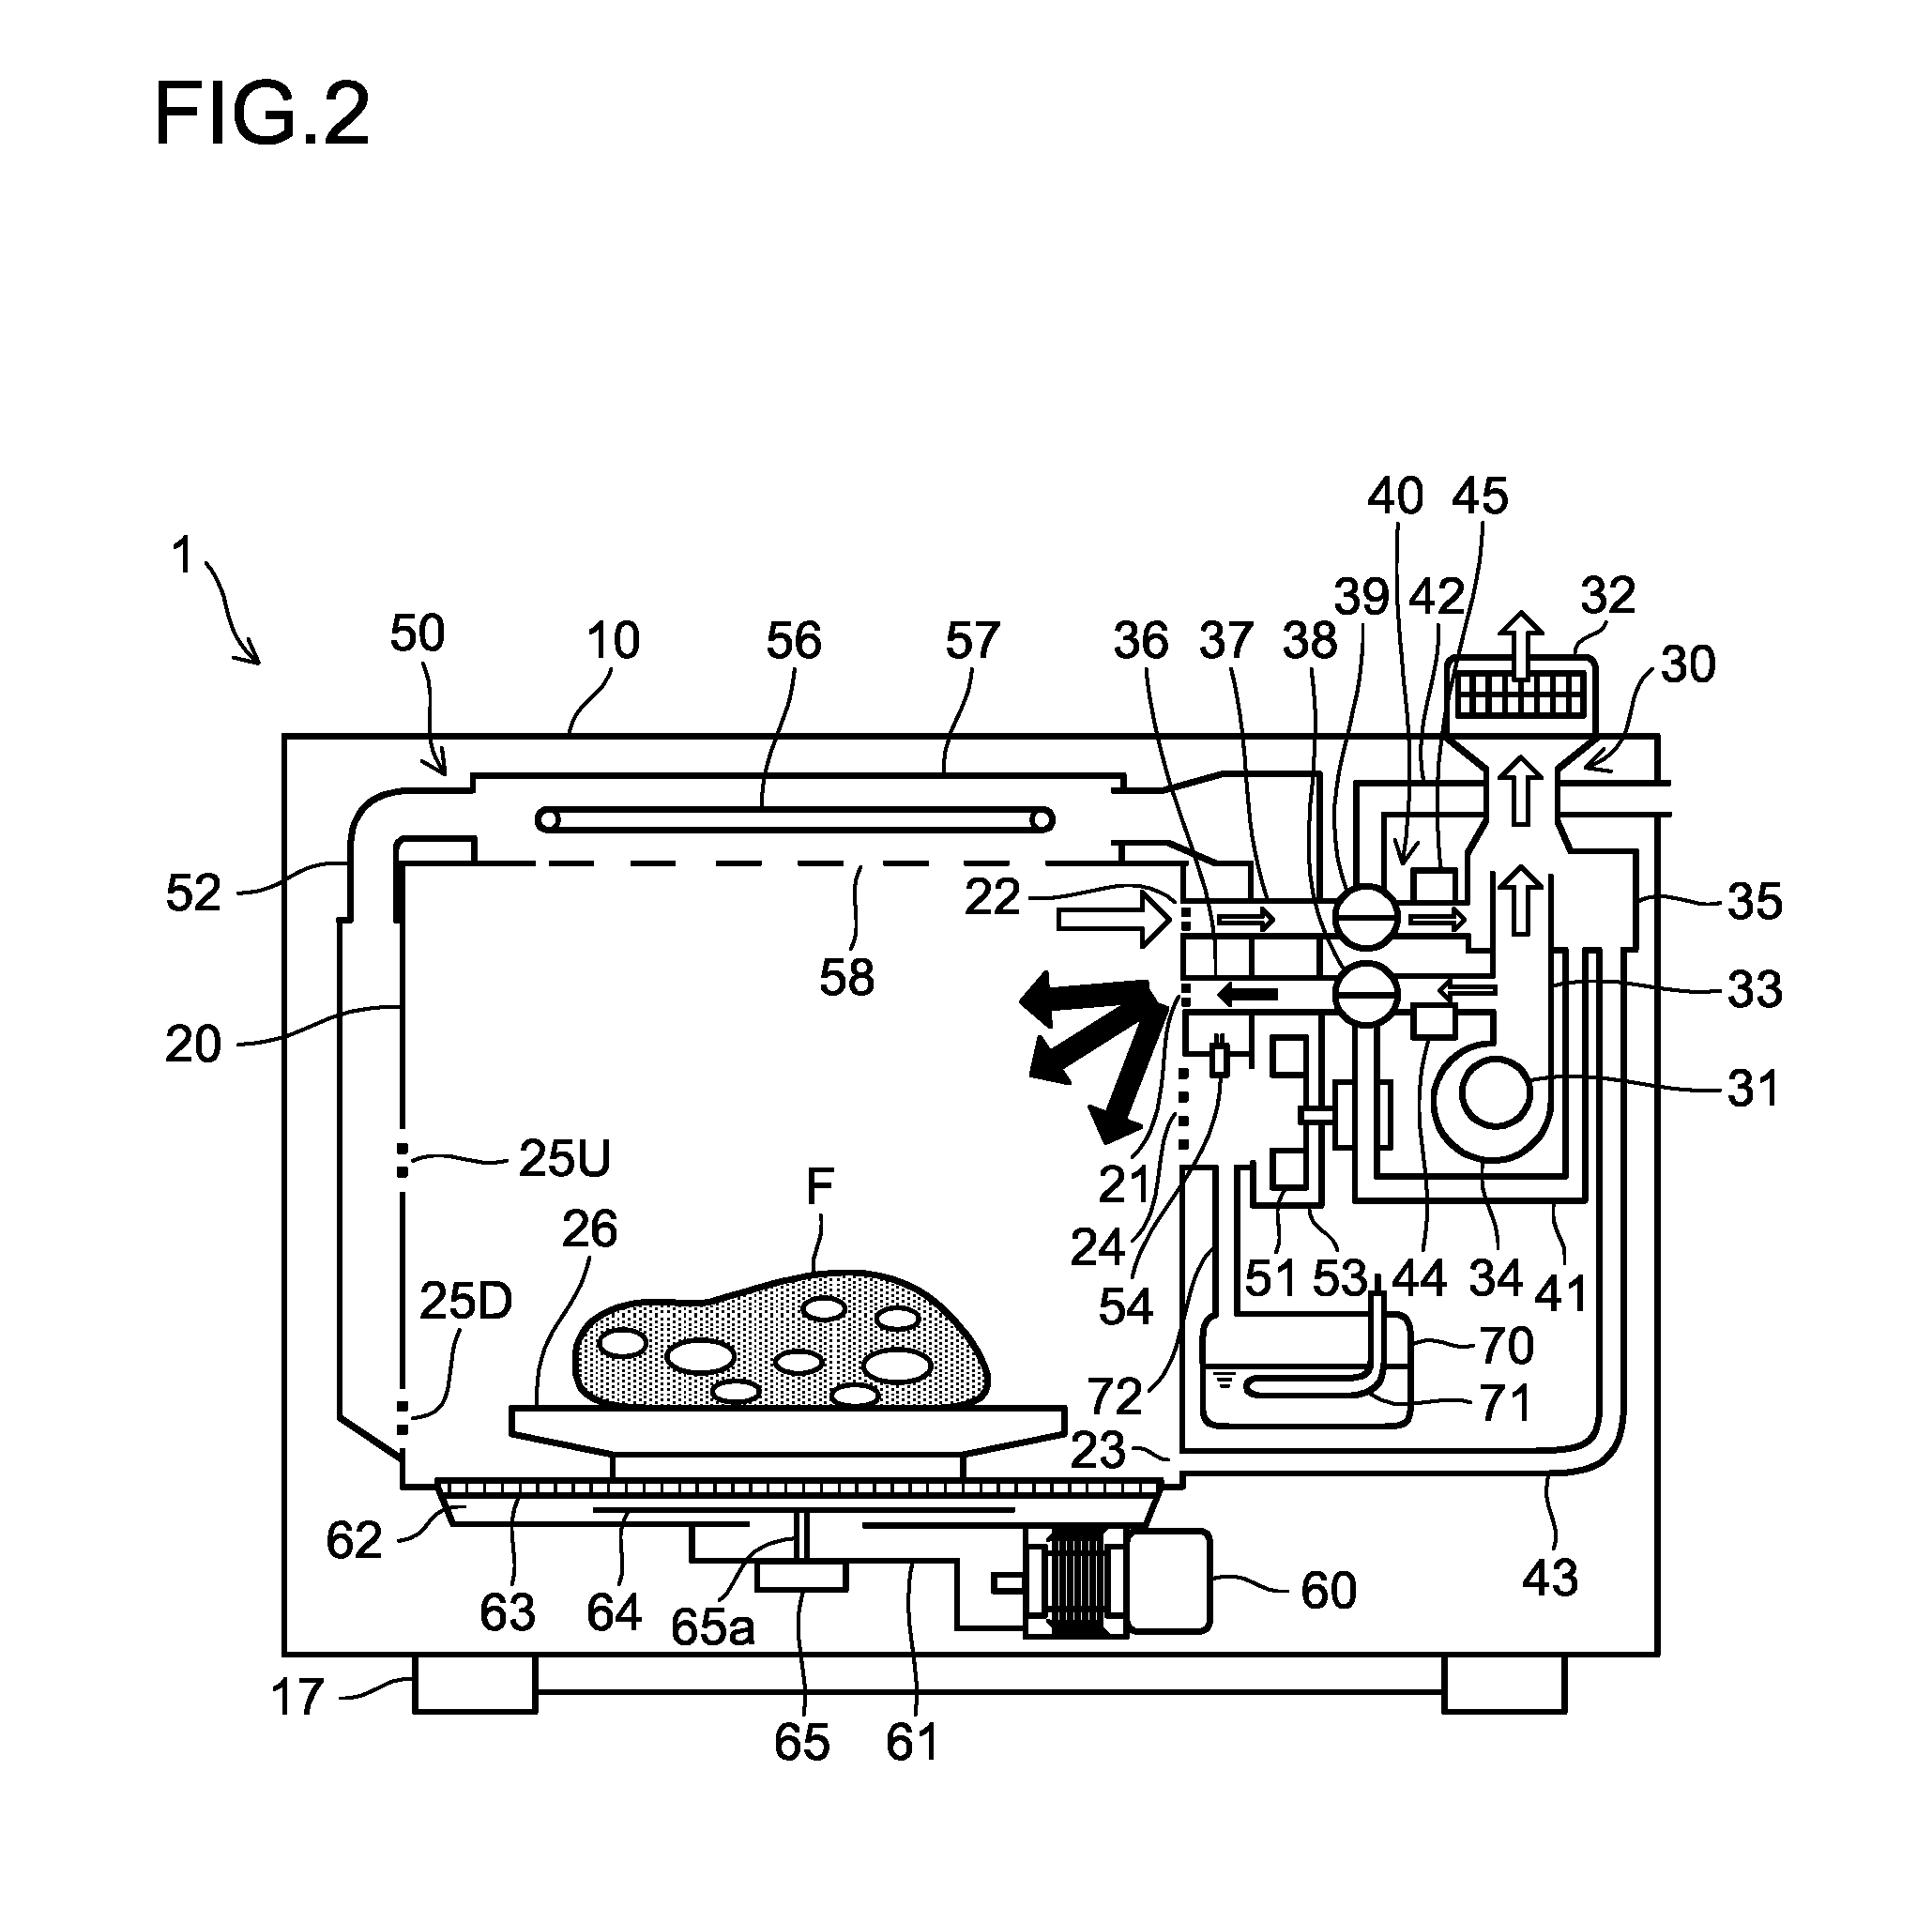 Heat cooking device